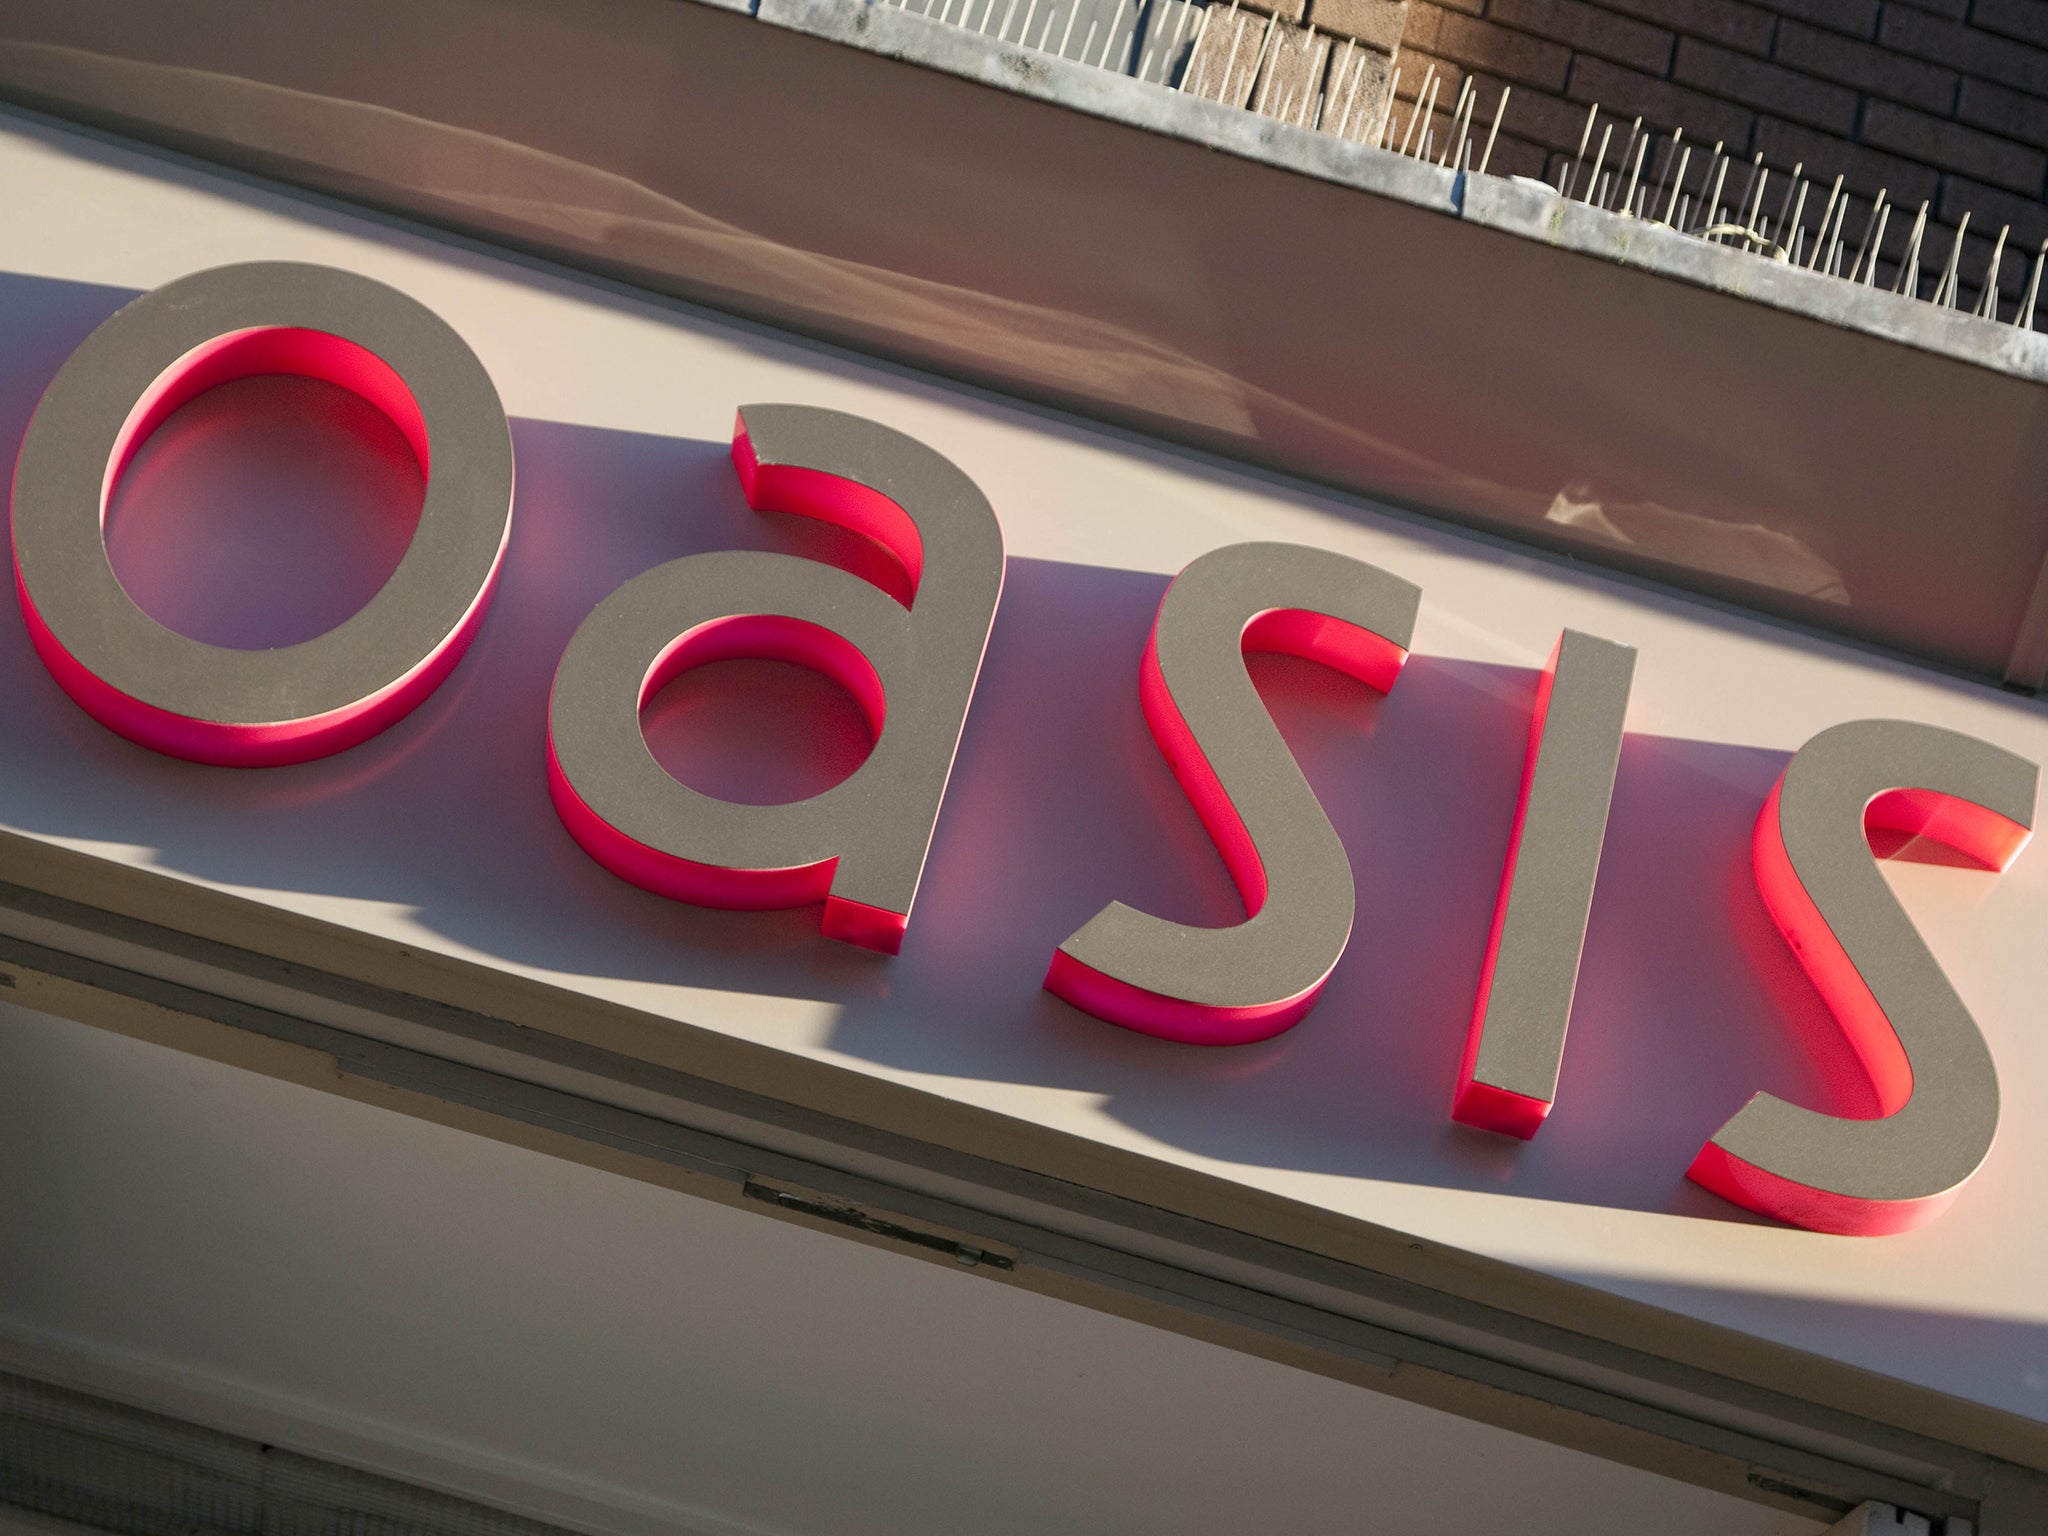 Oasis has 406 stores across the UK